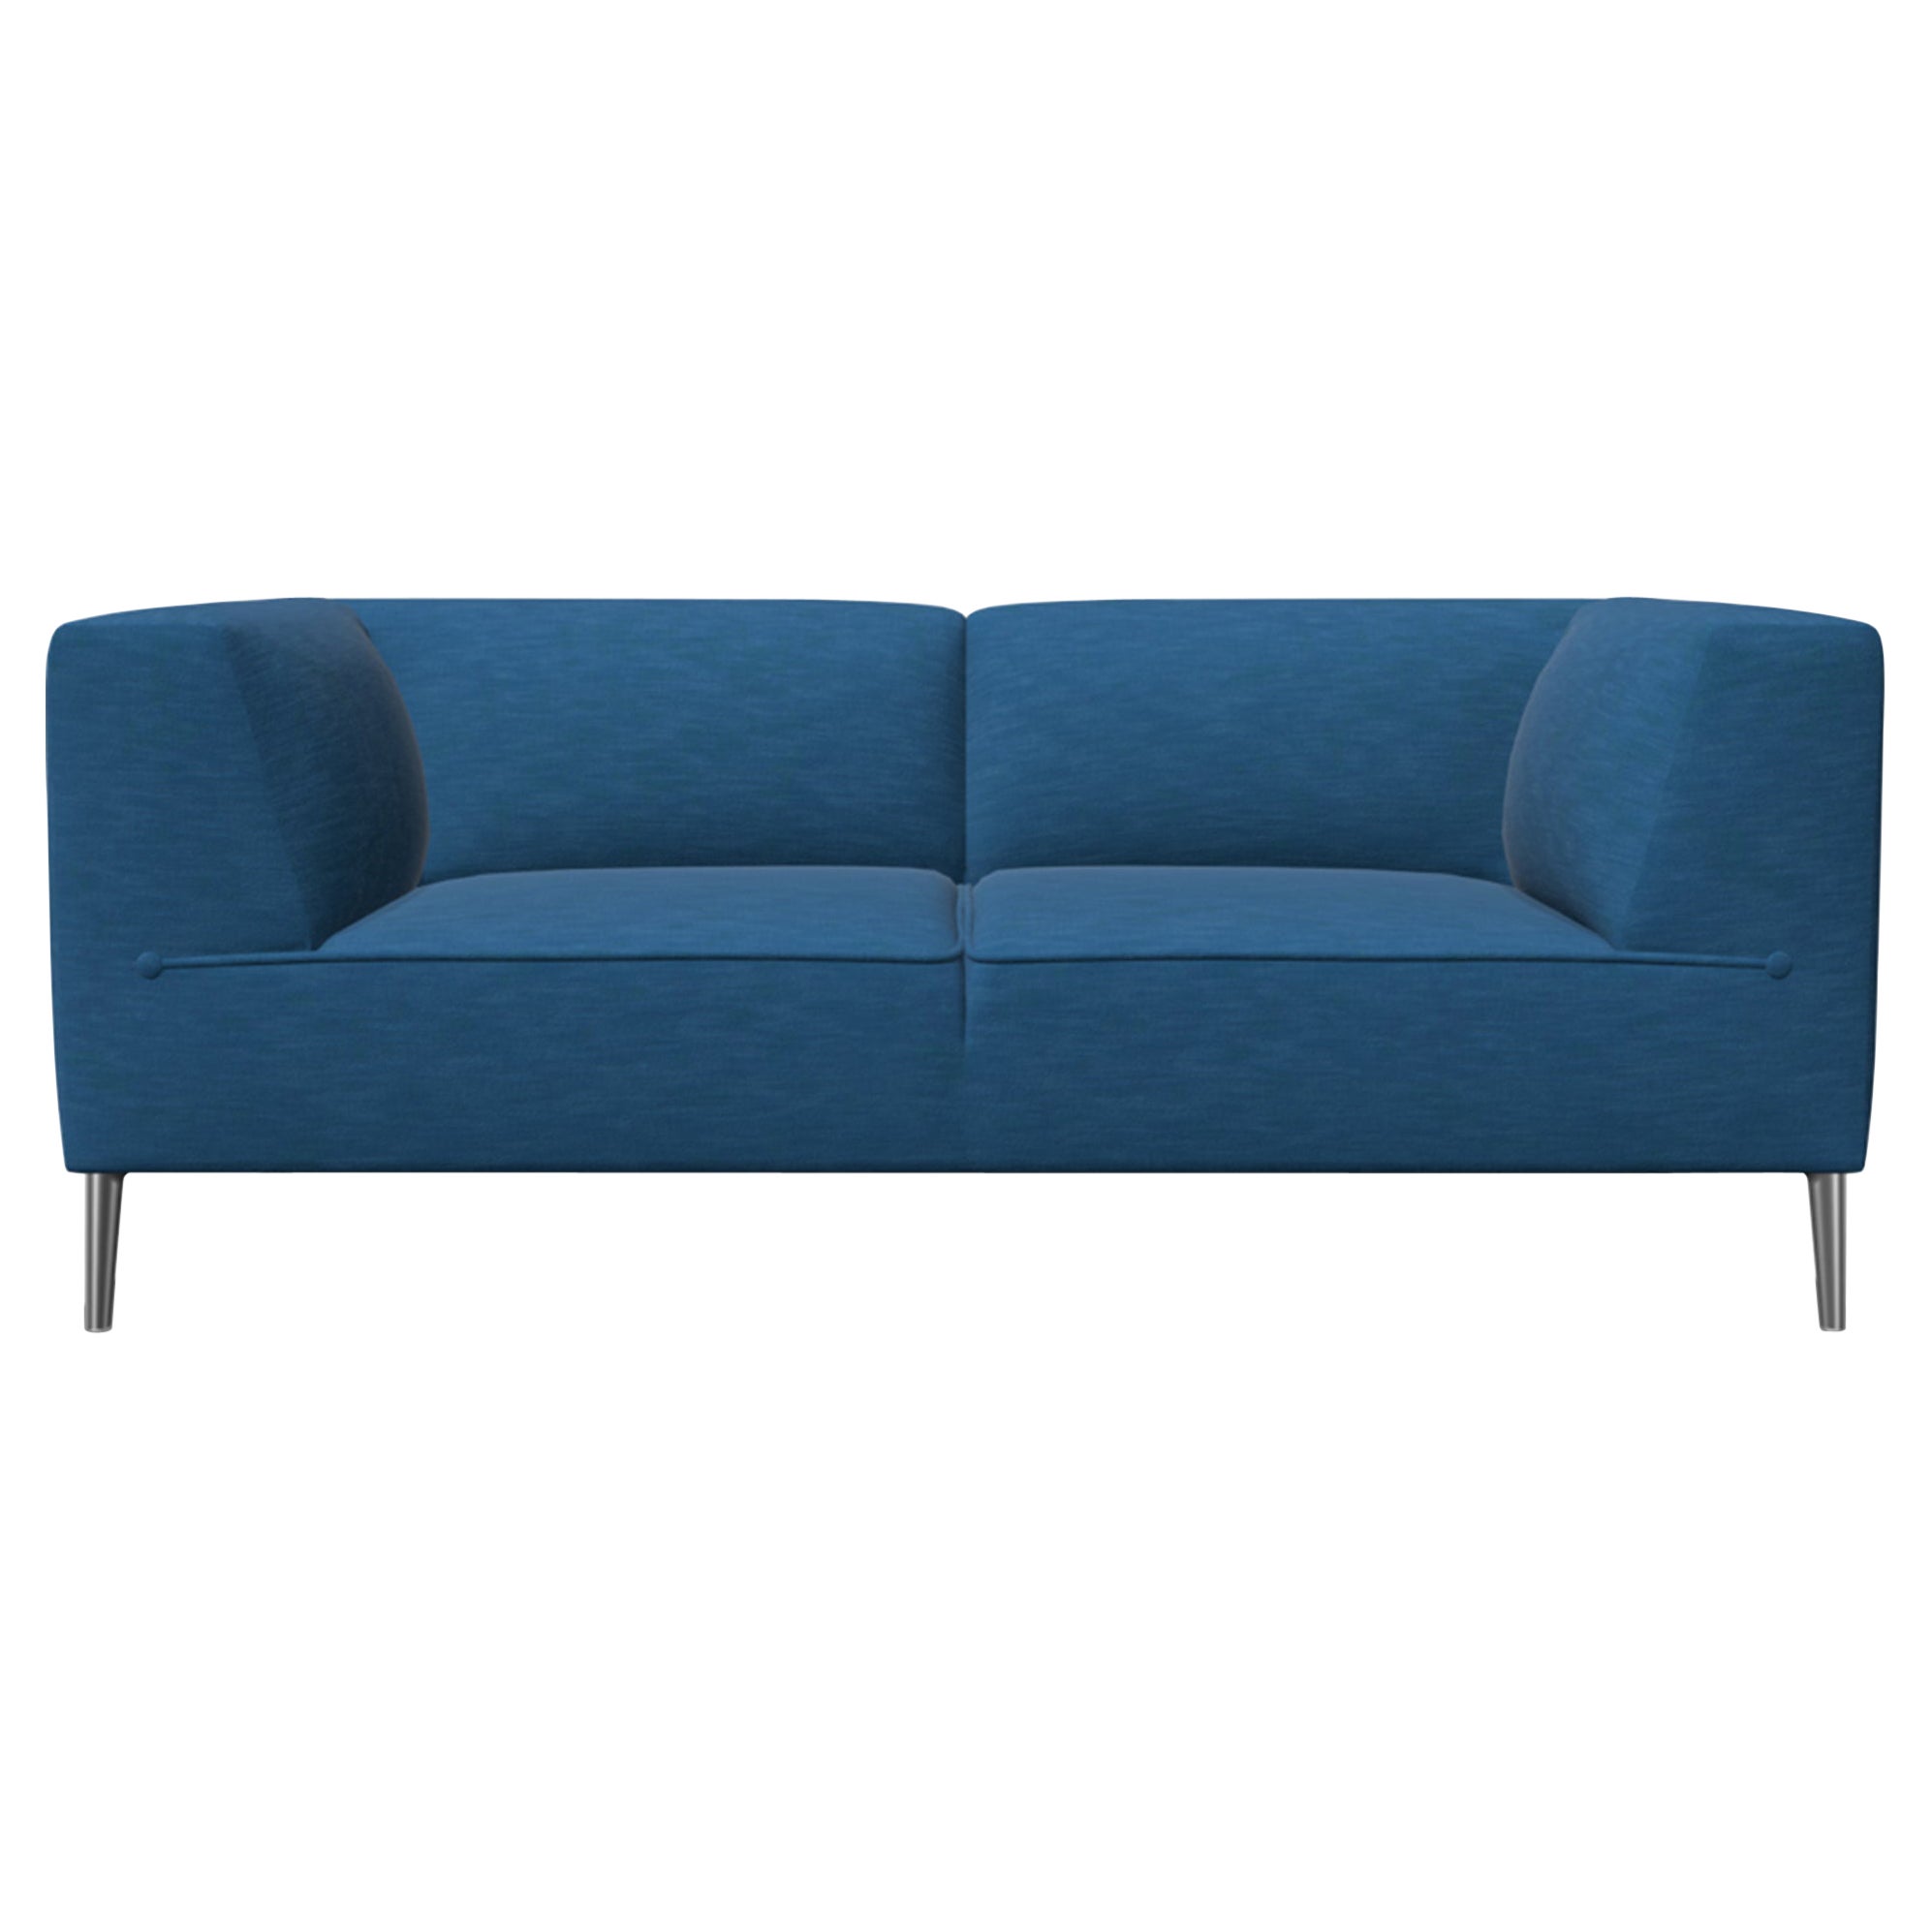 Moooi Double Seat Sofa So Good in Blue Upholstery with Polished Aluminum Feet For Sale